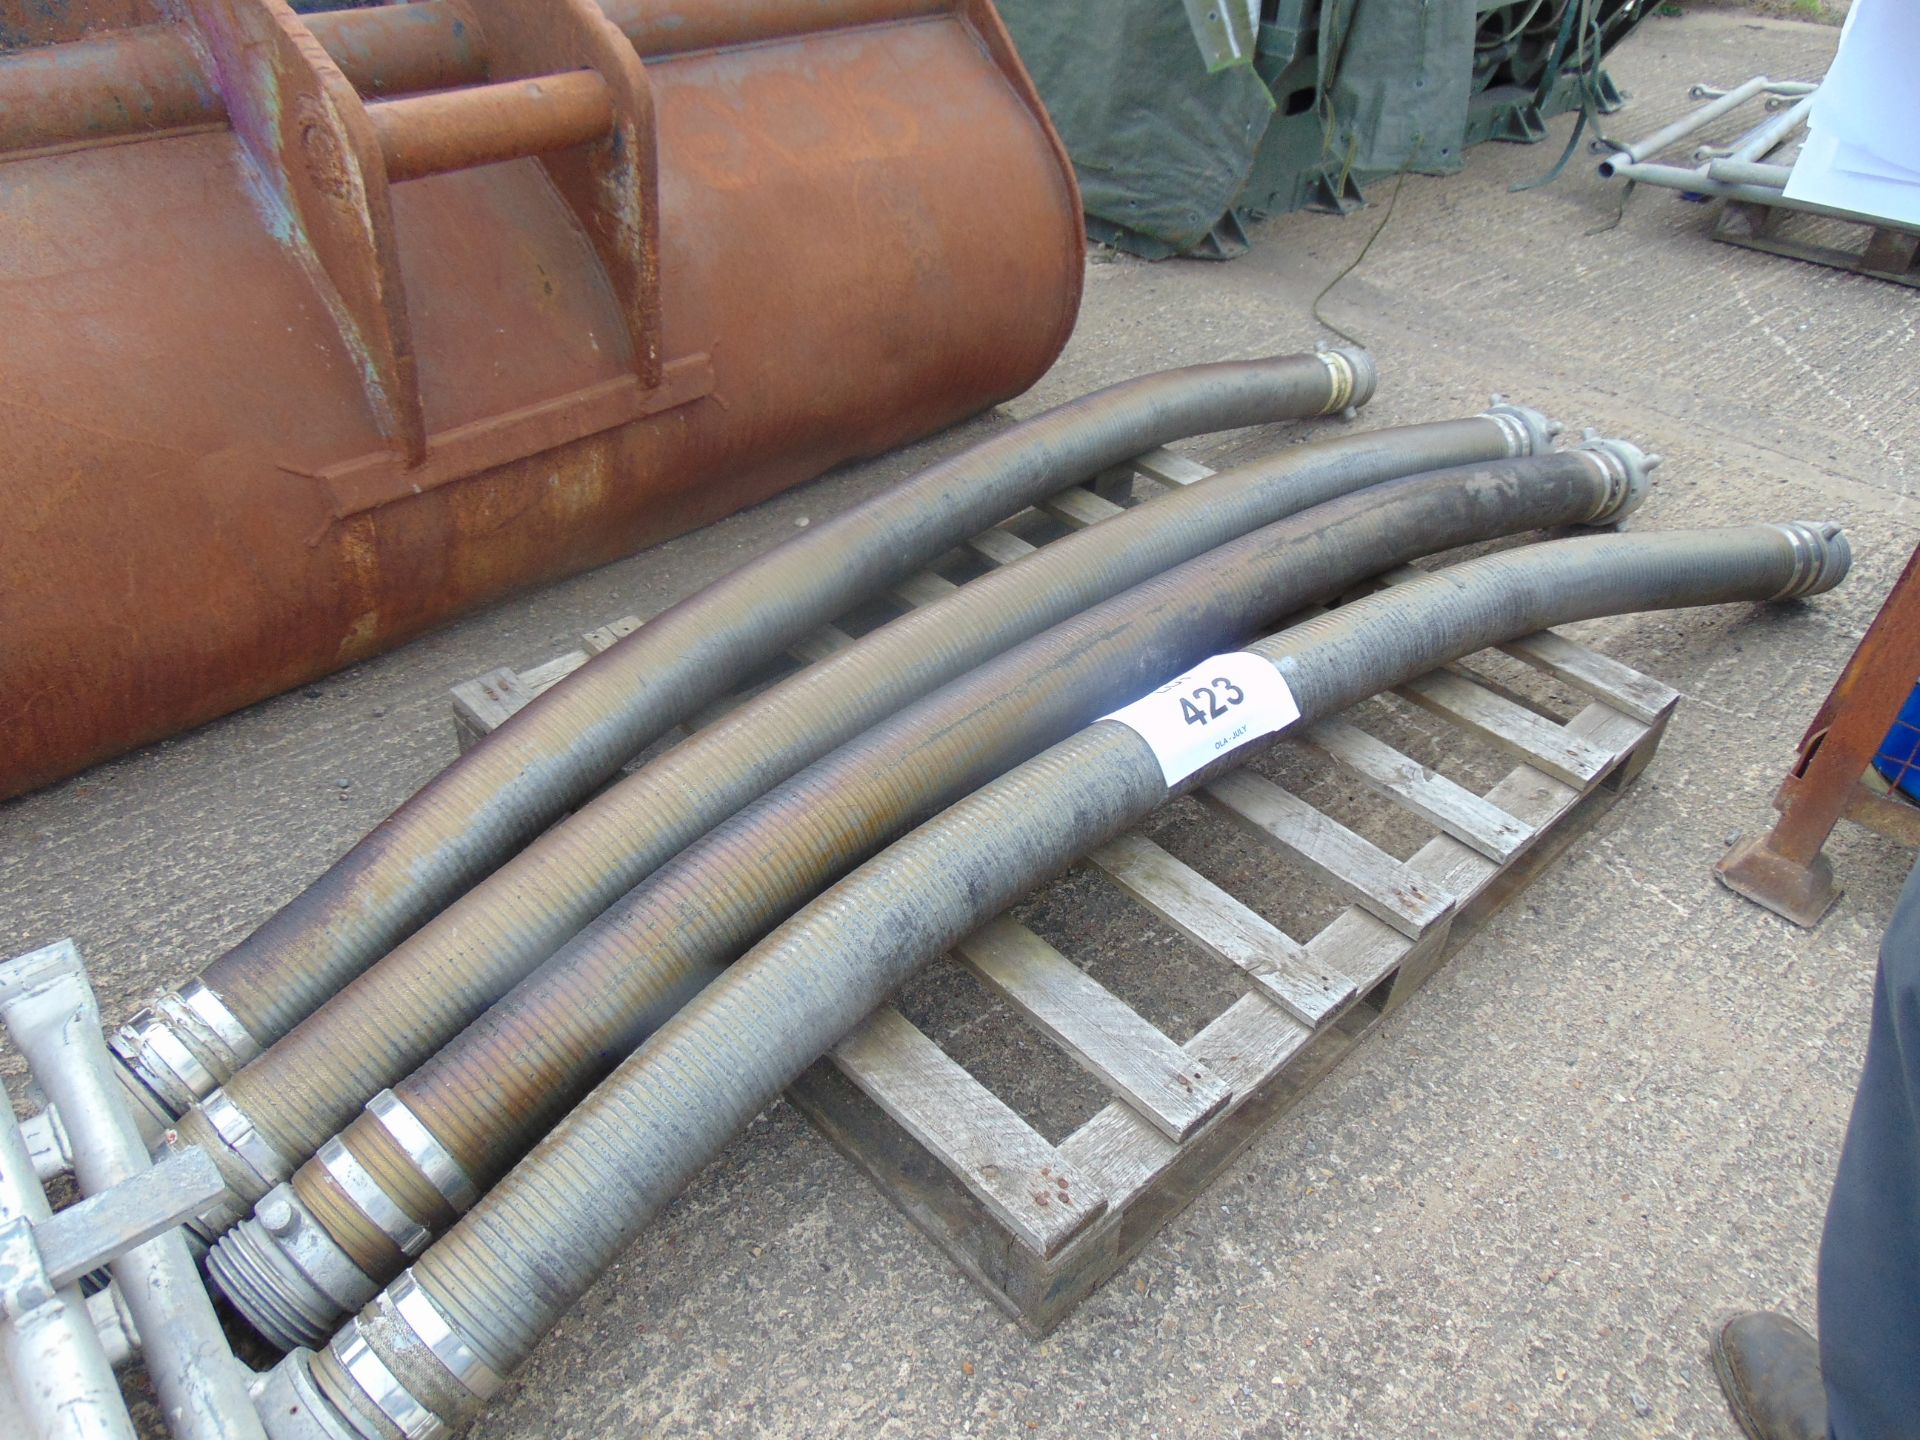 4 Lengths of 5ft Delivery Hose with Fittings